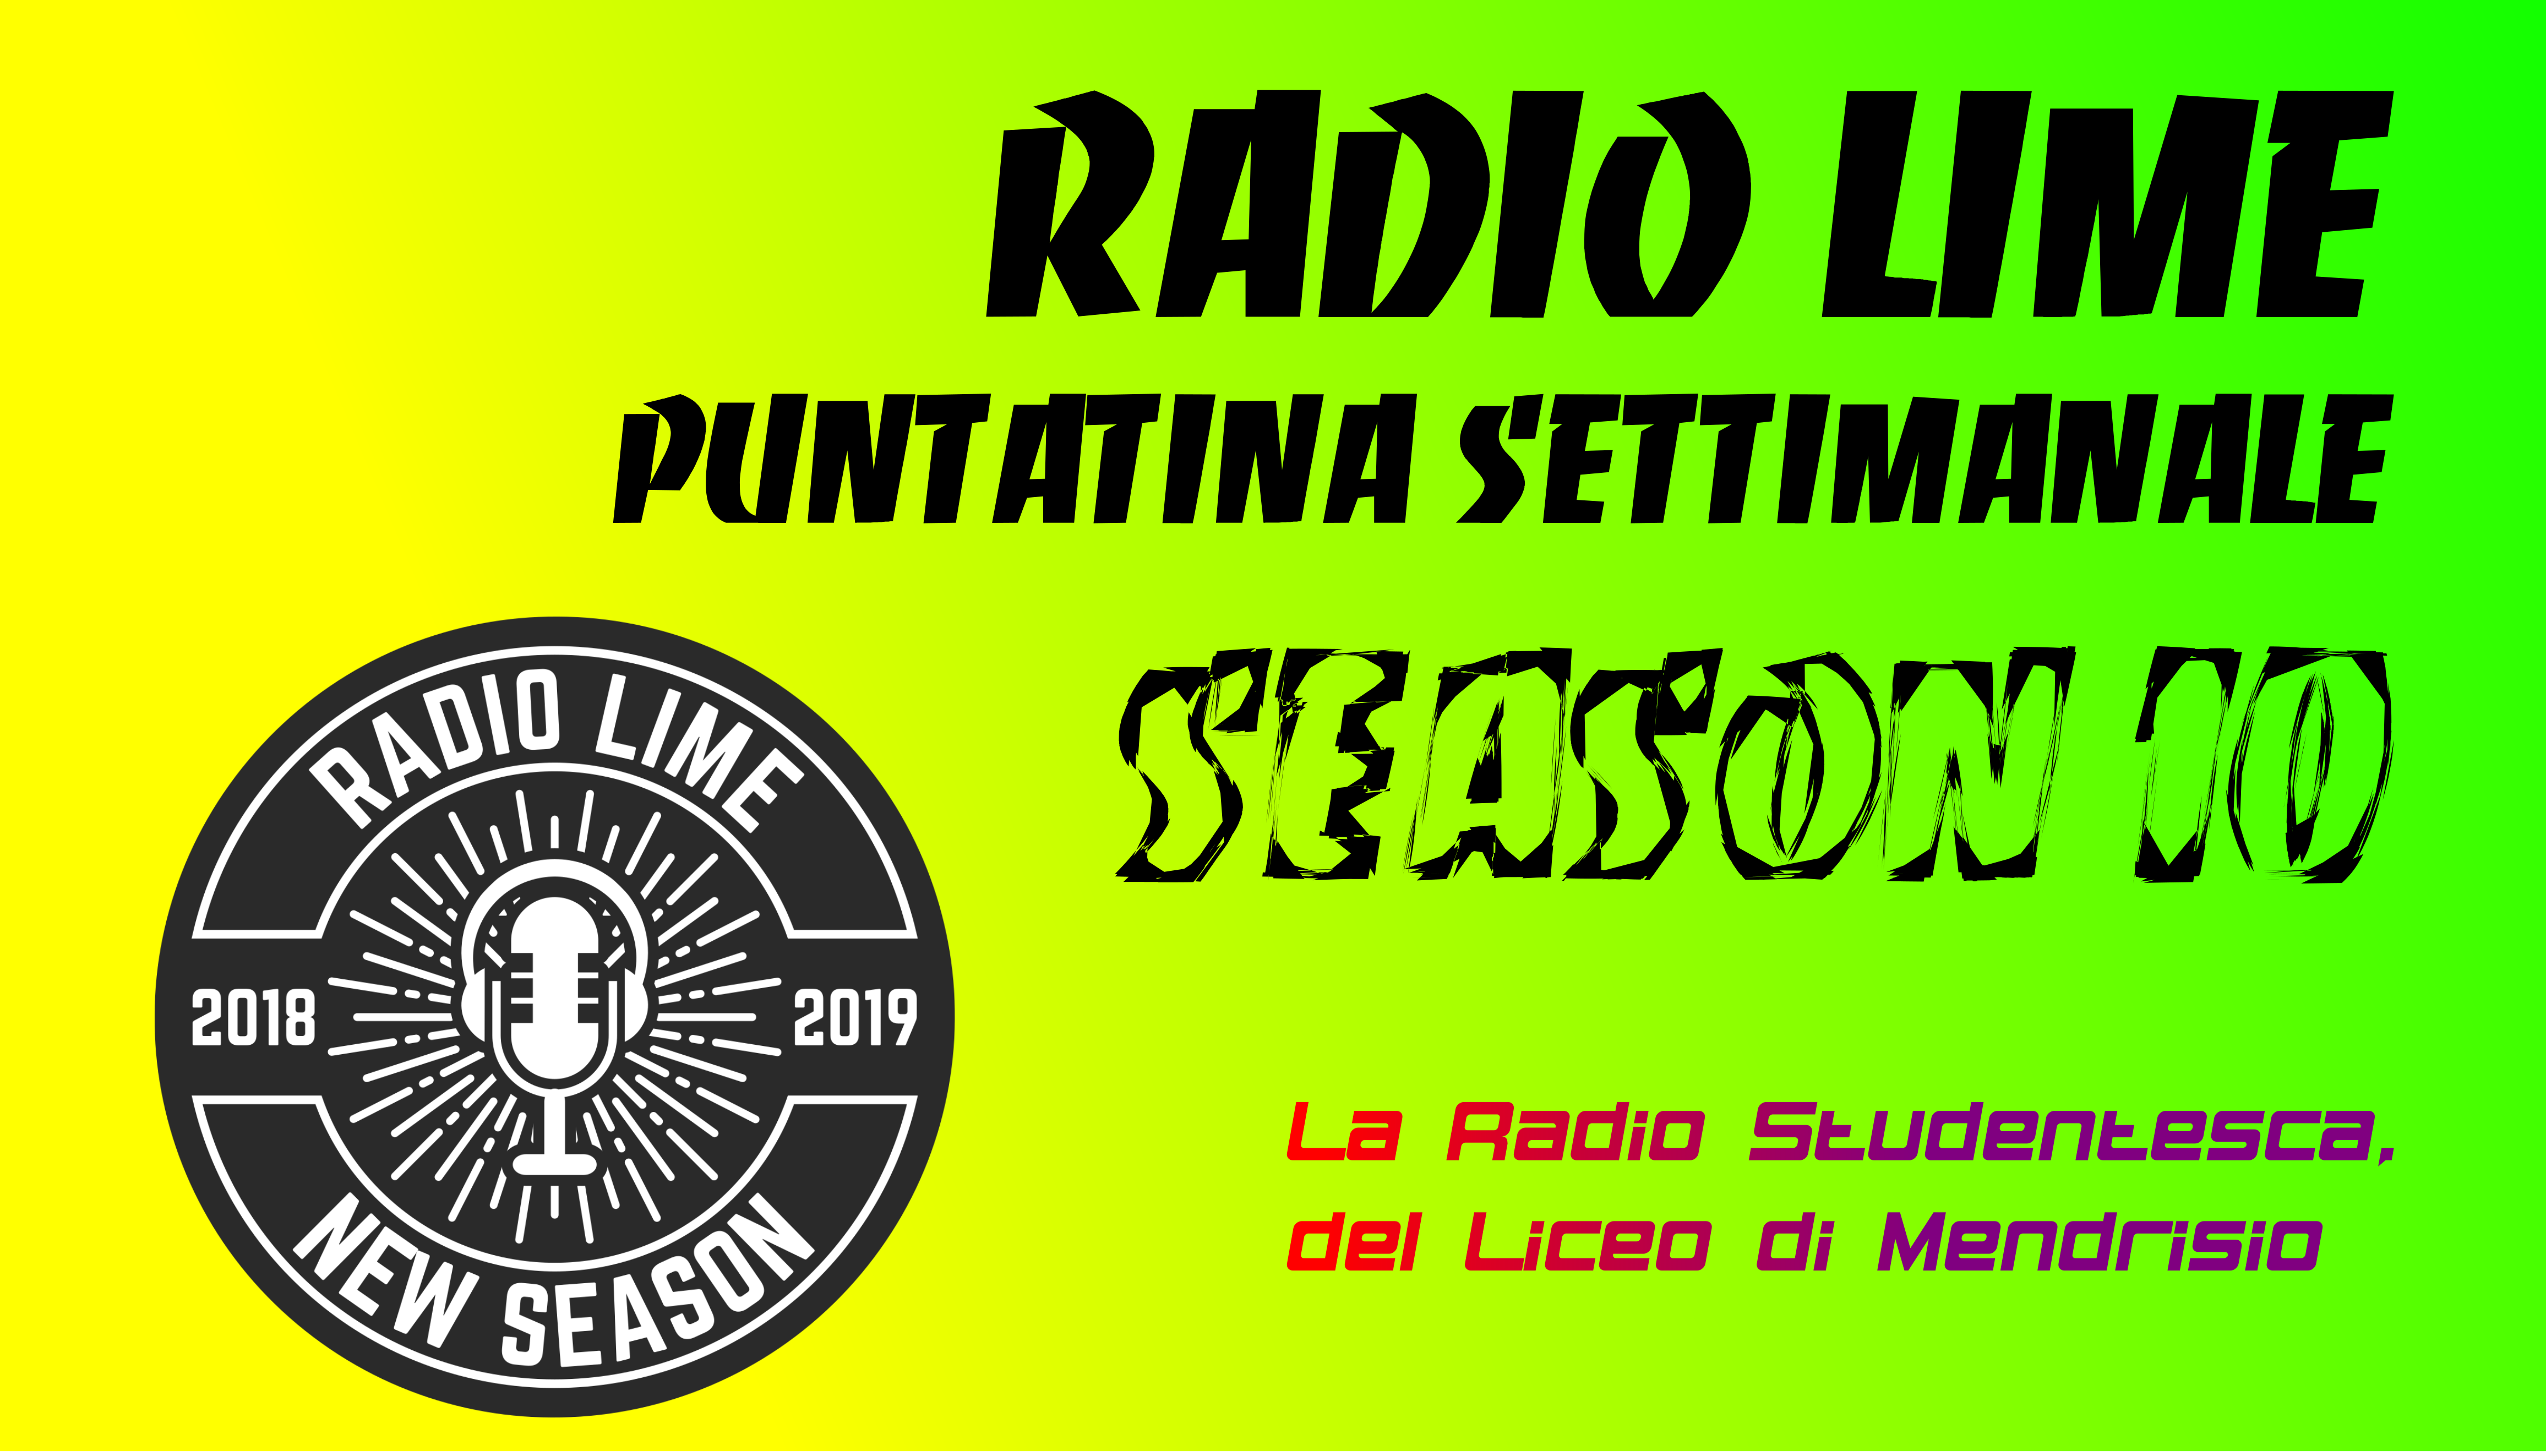 Laptop Radioing Session LiMe - 25/04/2019